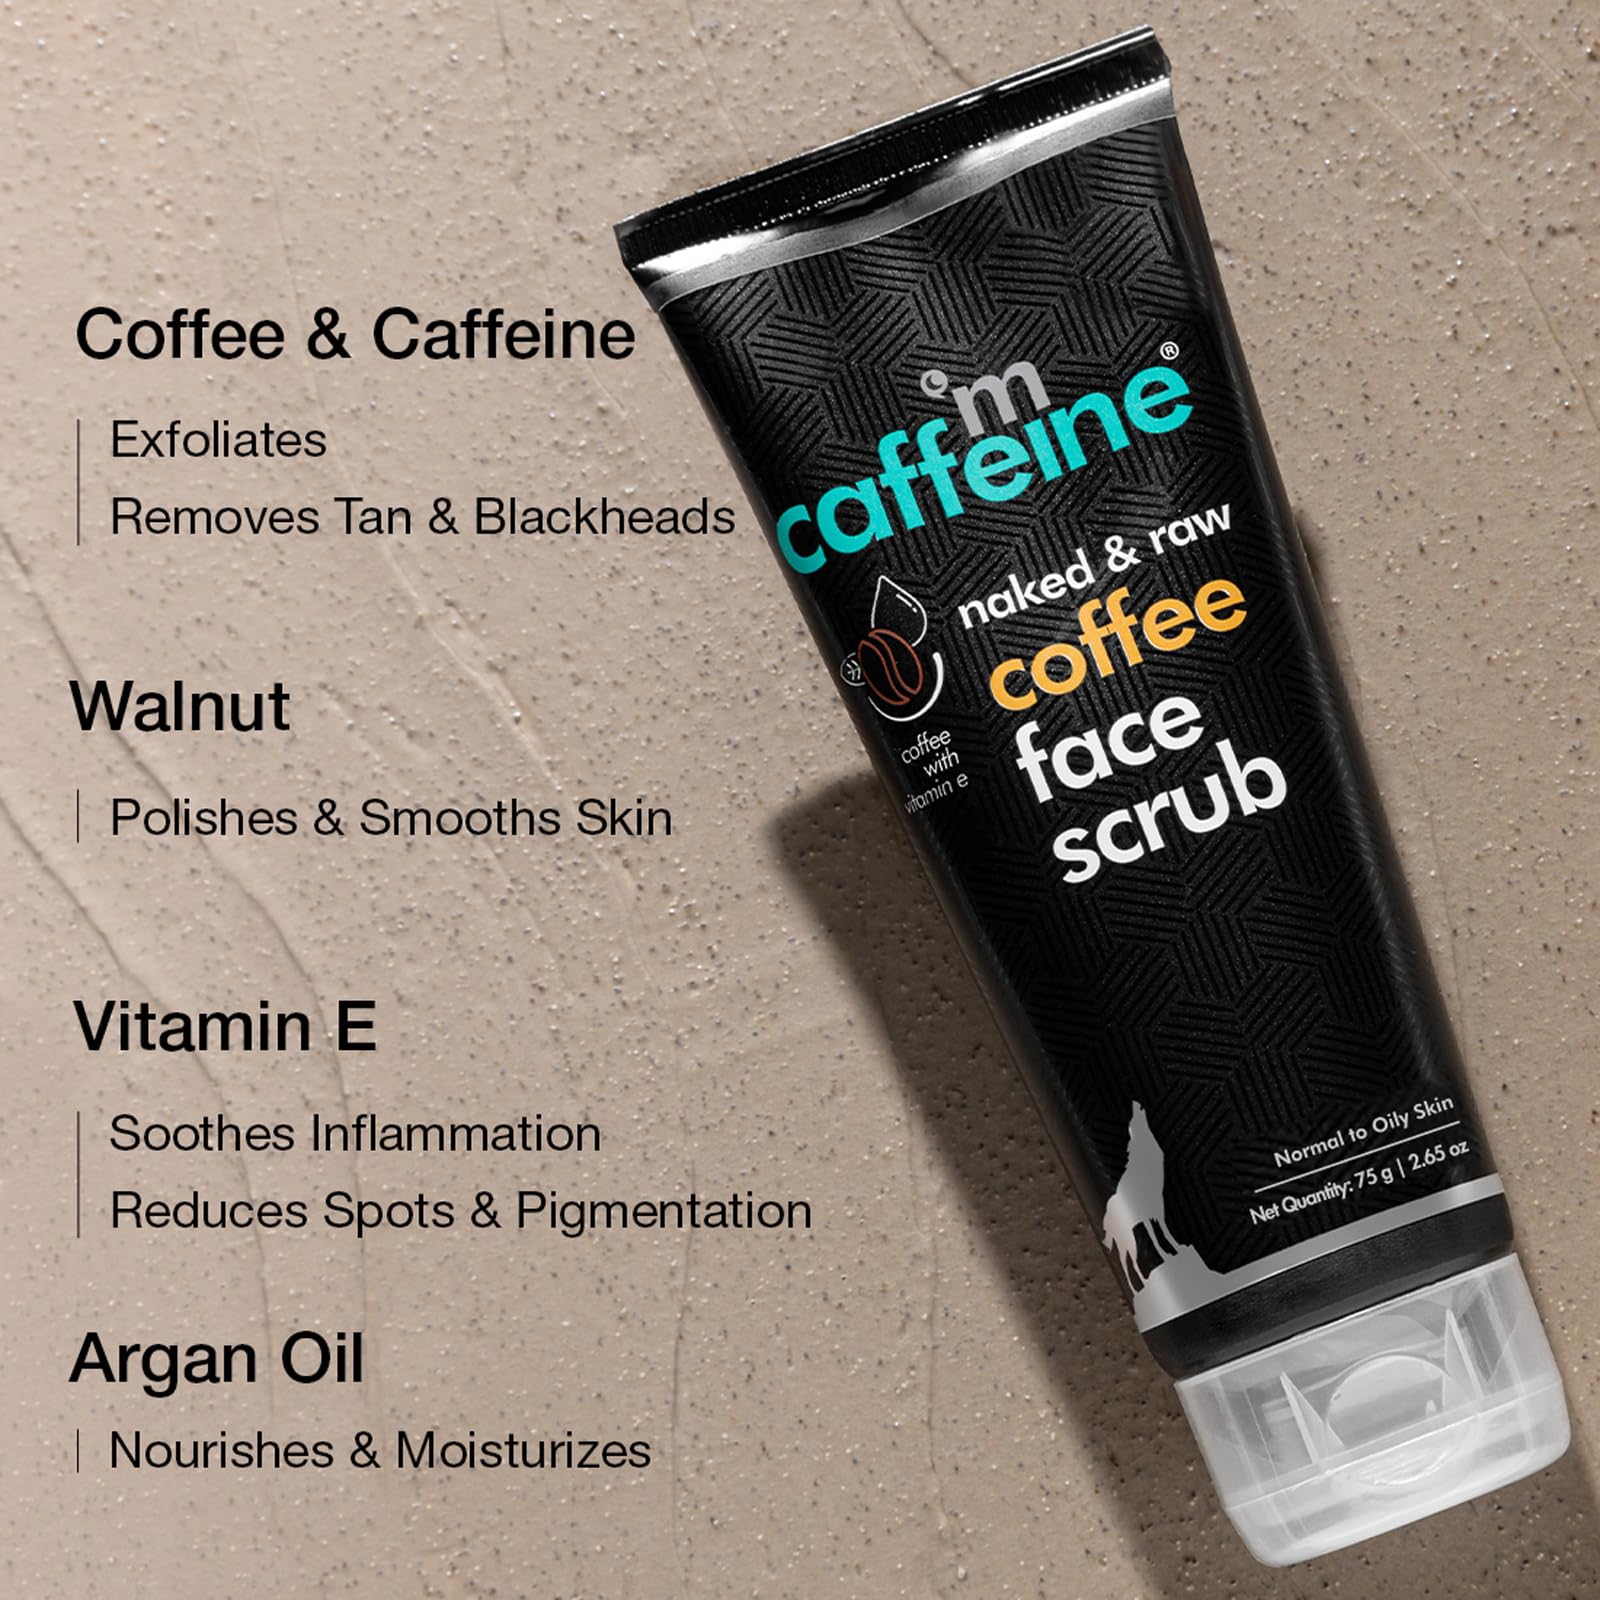 mCaffeine Naked and Raw Coffee Face Scrub - Face Cleanser with Pure Arabica Coffee - Face Wash Reduces Spots - Cappuccino - All Skin Types - 2.6 oz